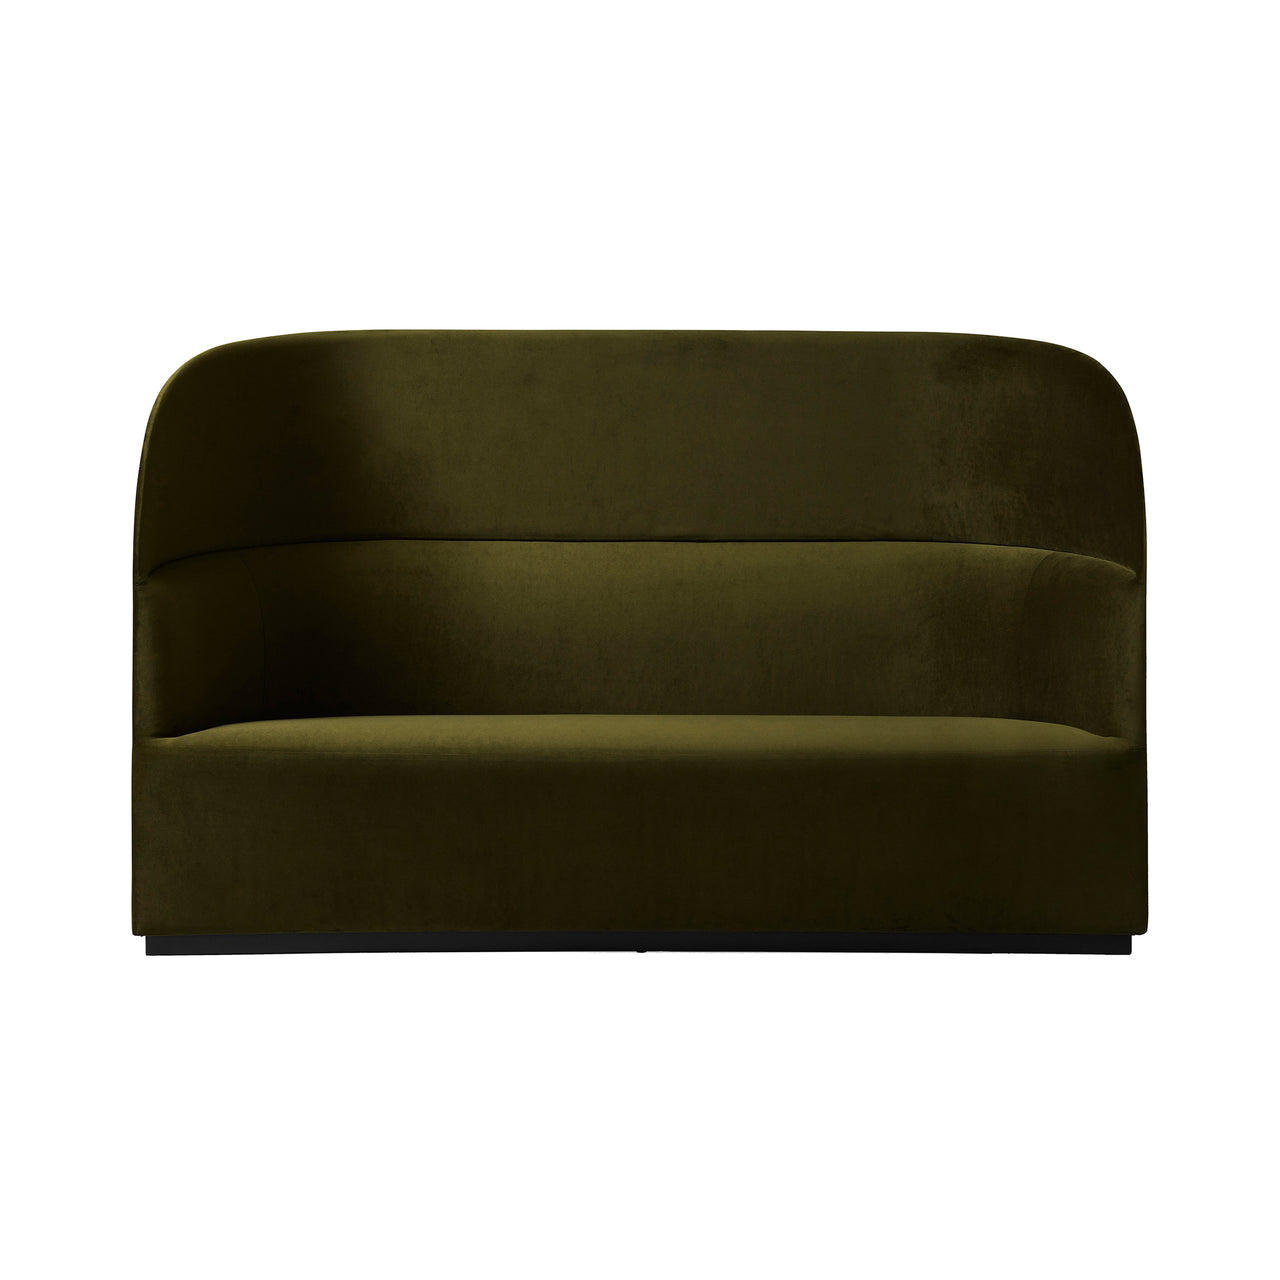 Tearoom Highback Sofa: Without Power Outlet + Champion 035